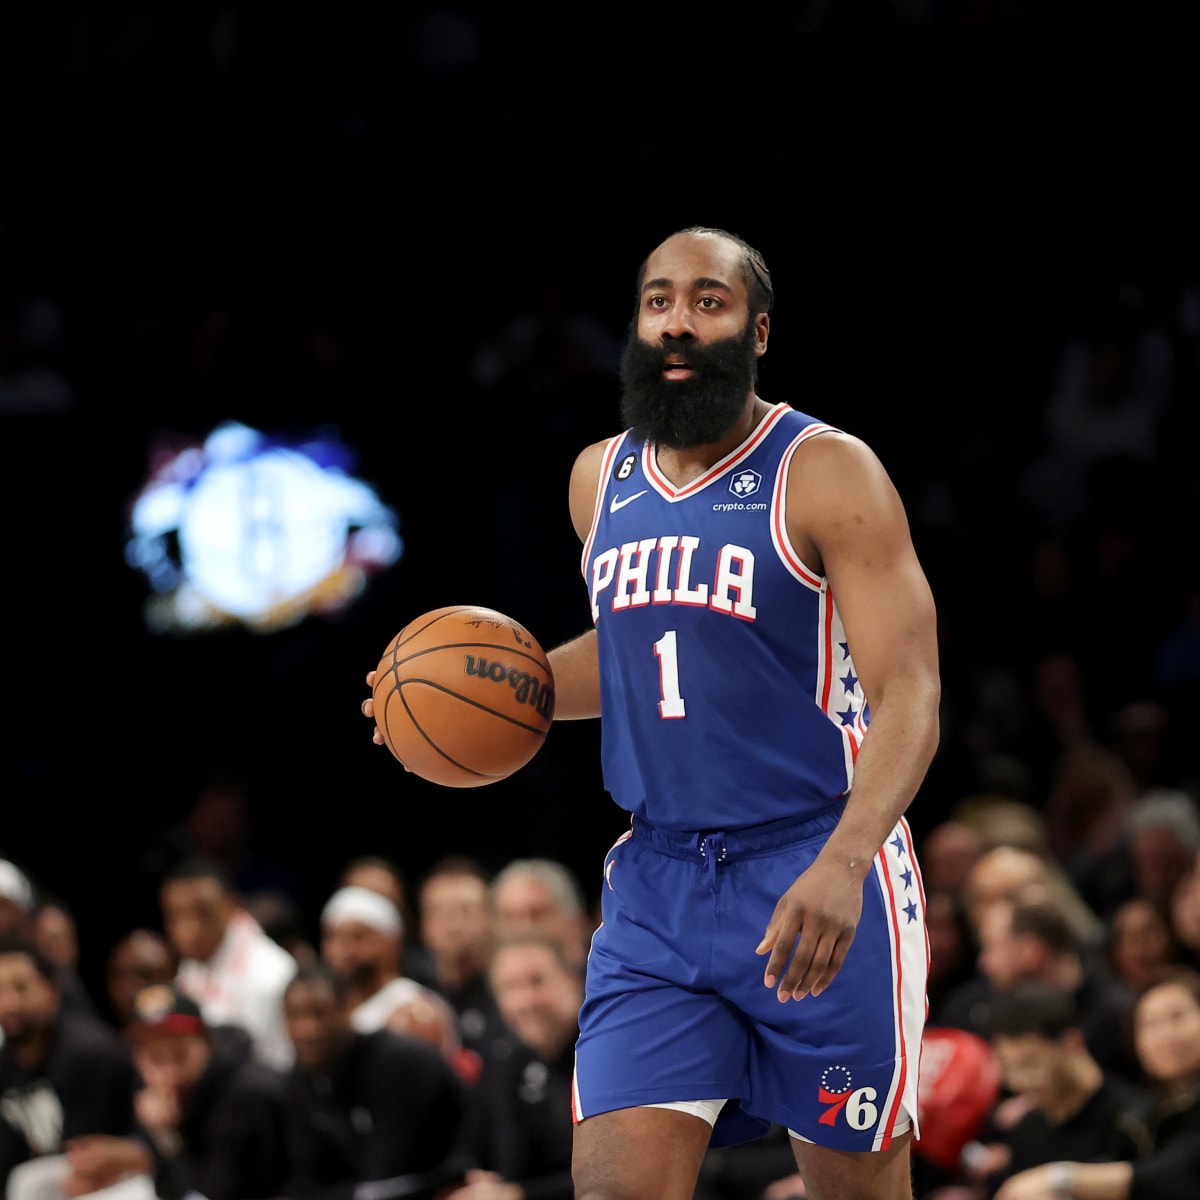 Sixers' James Harden supported by Kyrie Irving, Andre Iguodala